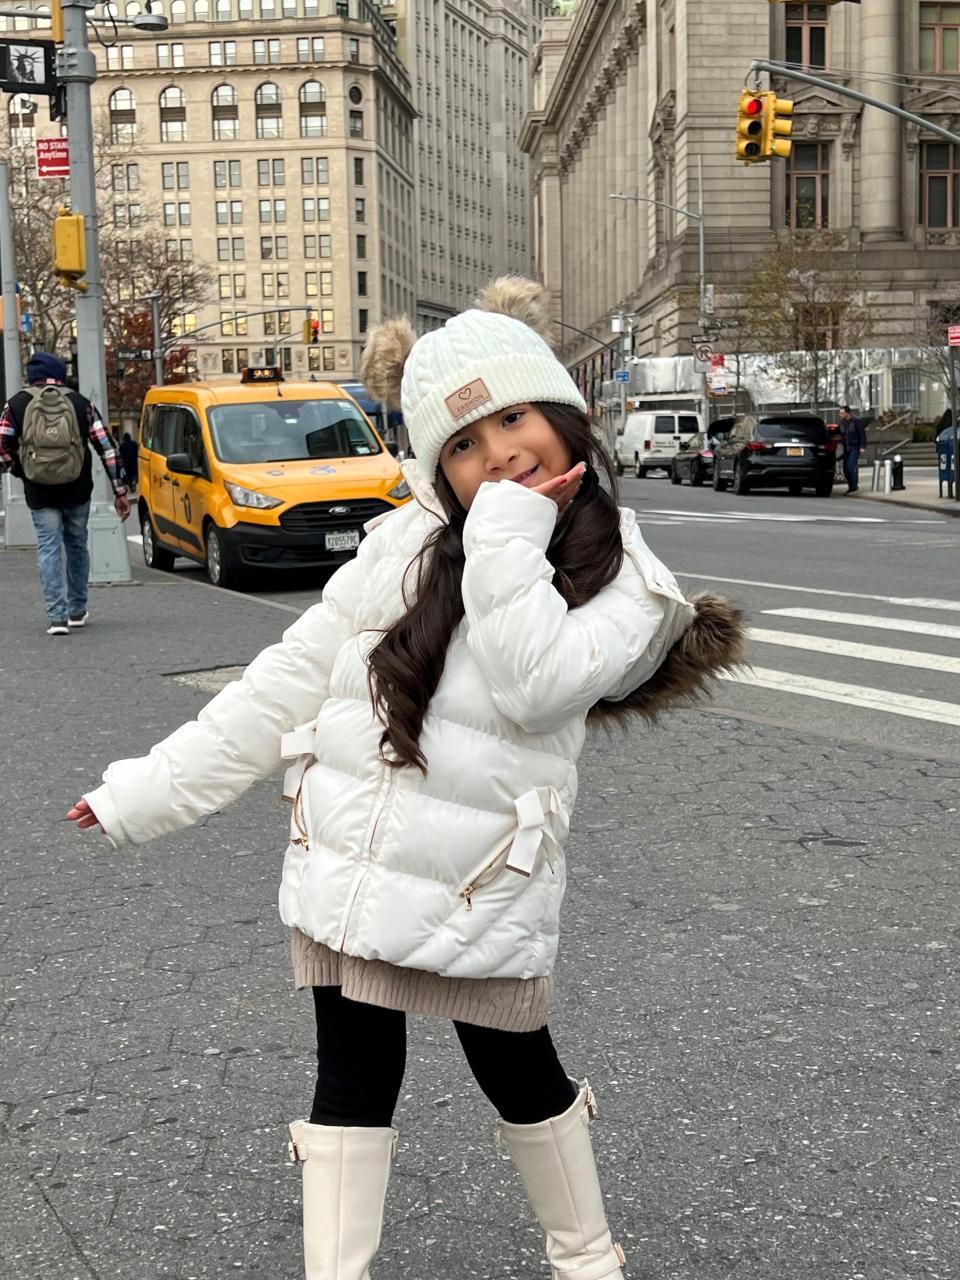 Natalie Rodriguez on her trip to New York City that resulted in a viral hug from Taylor Swift